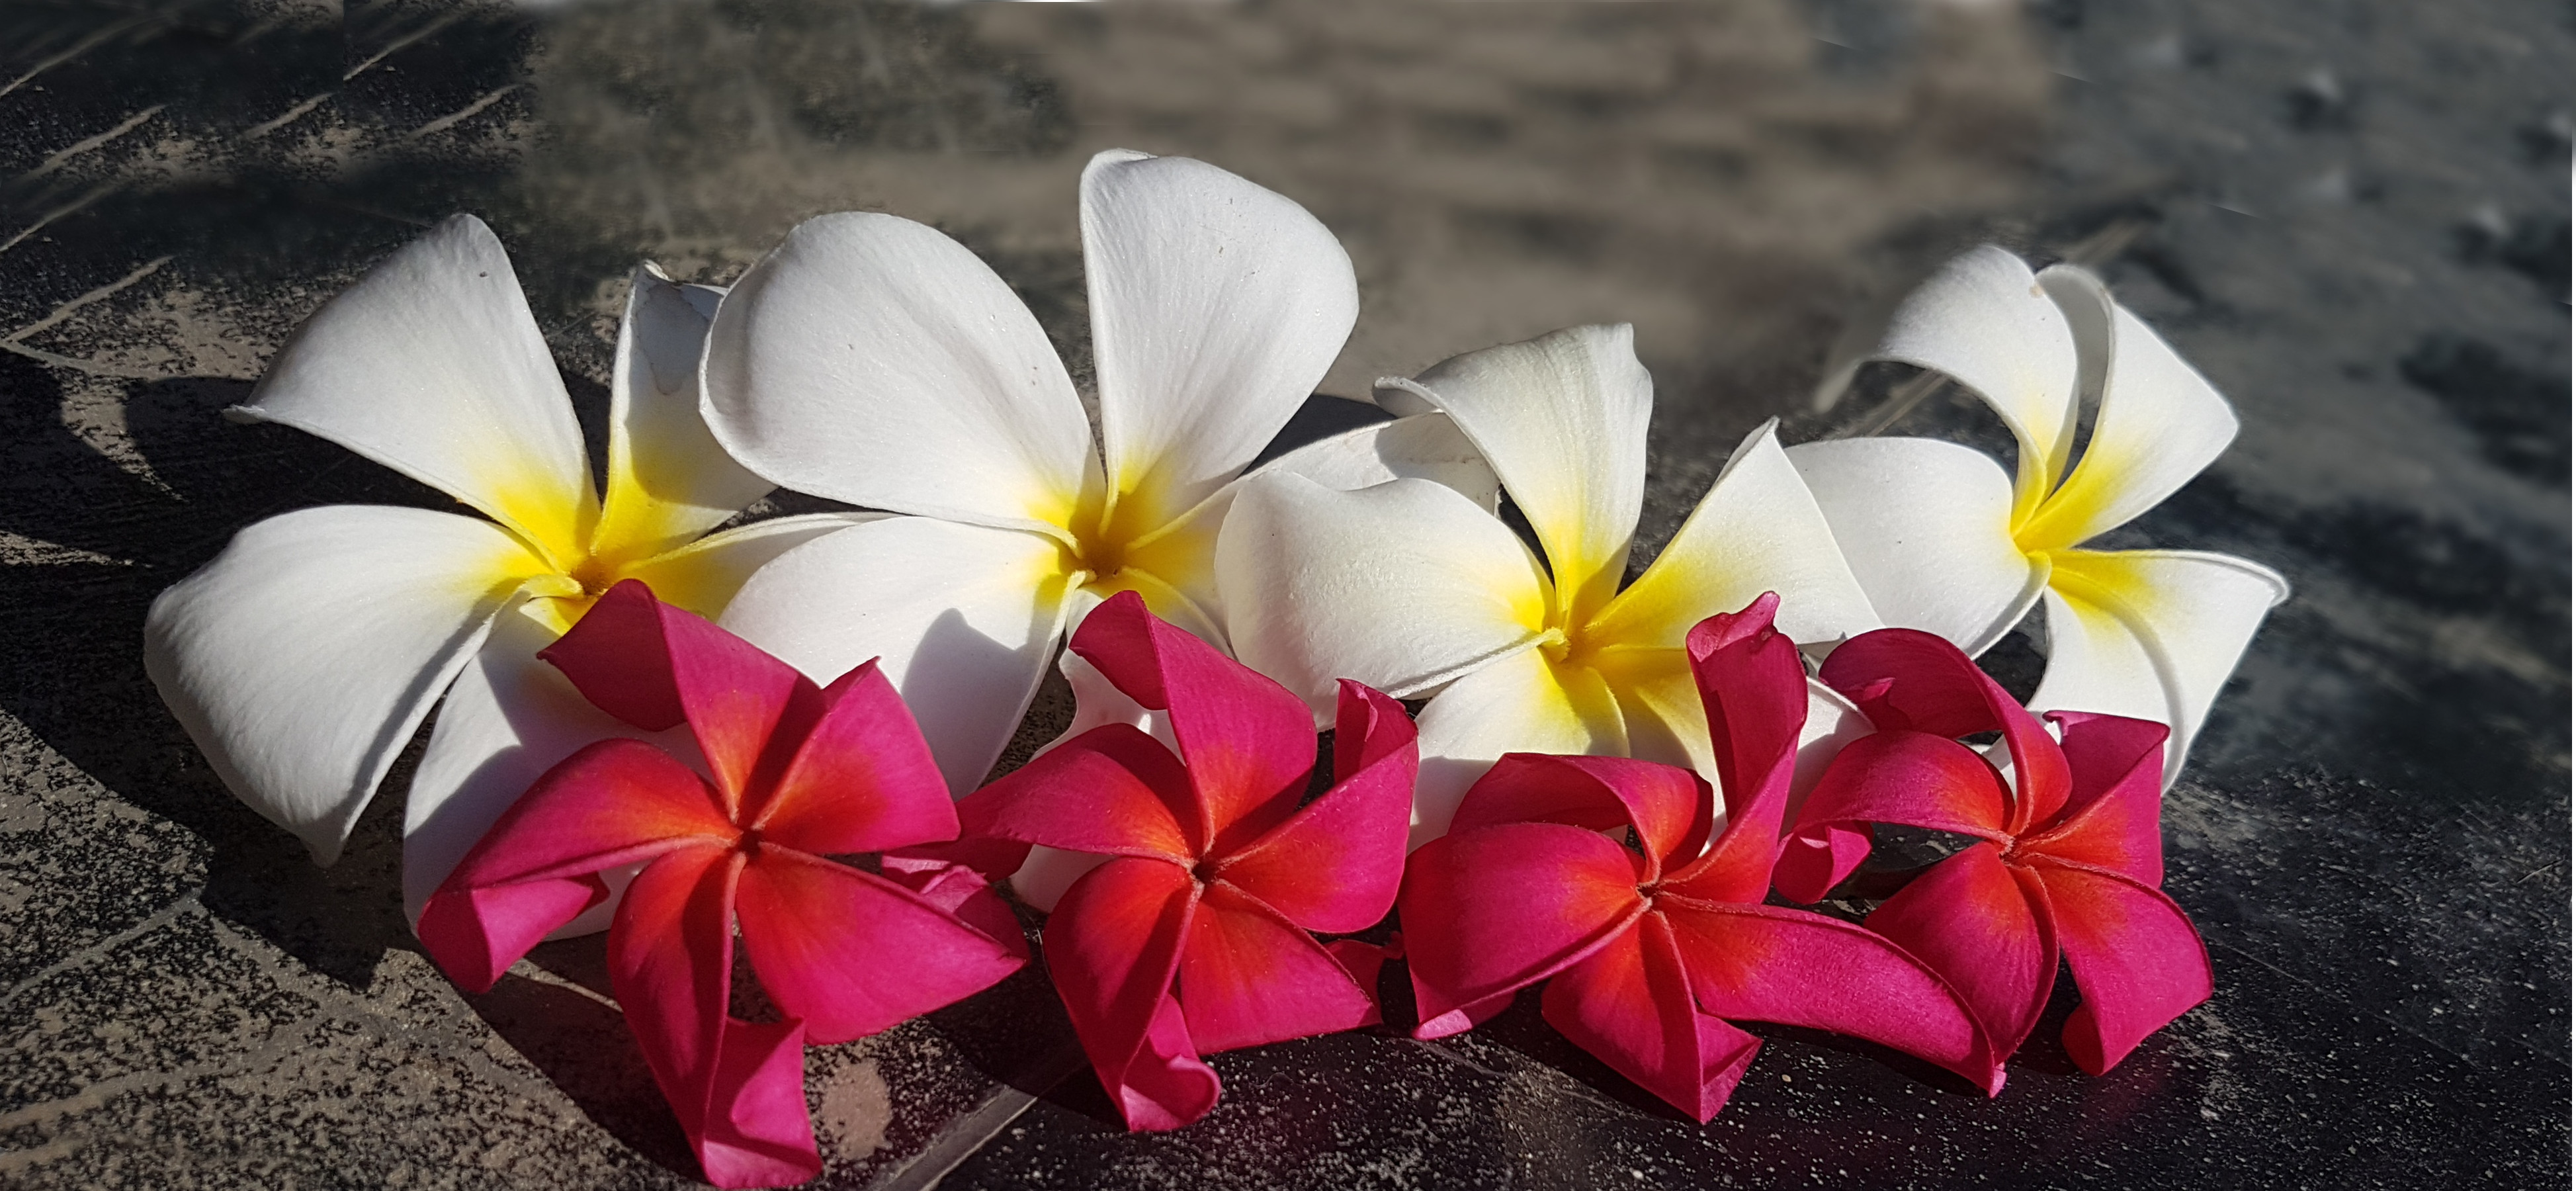 The Plumeria Directory - A catalog of known Plumeria varieties